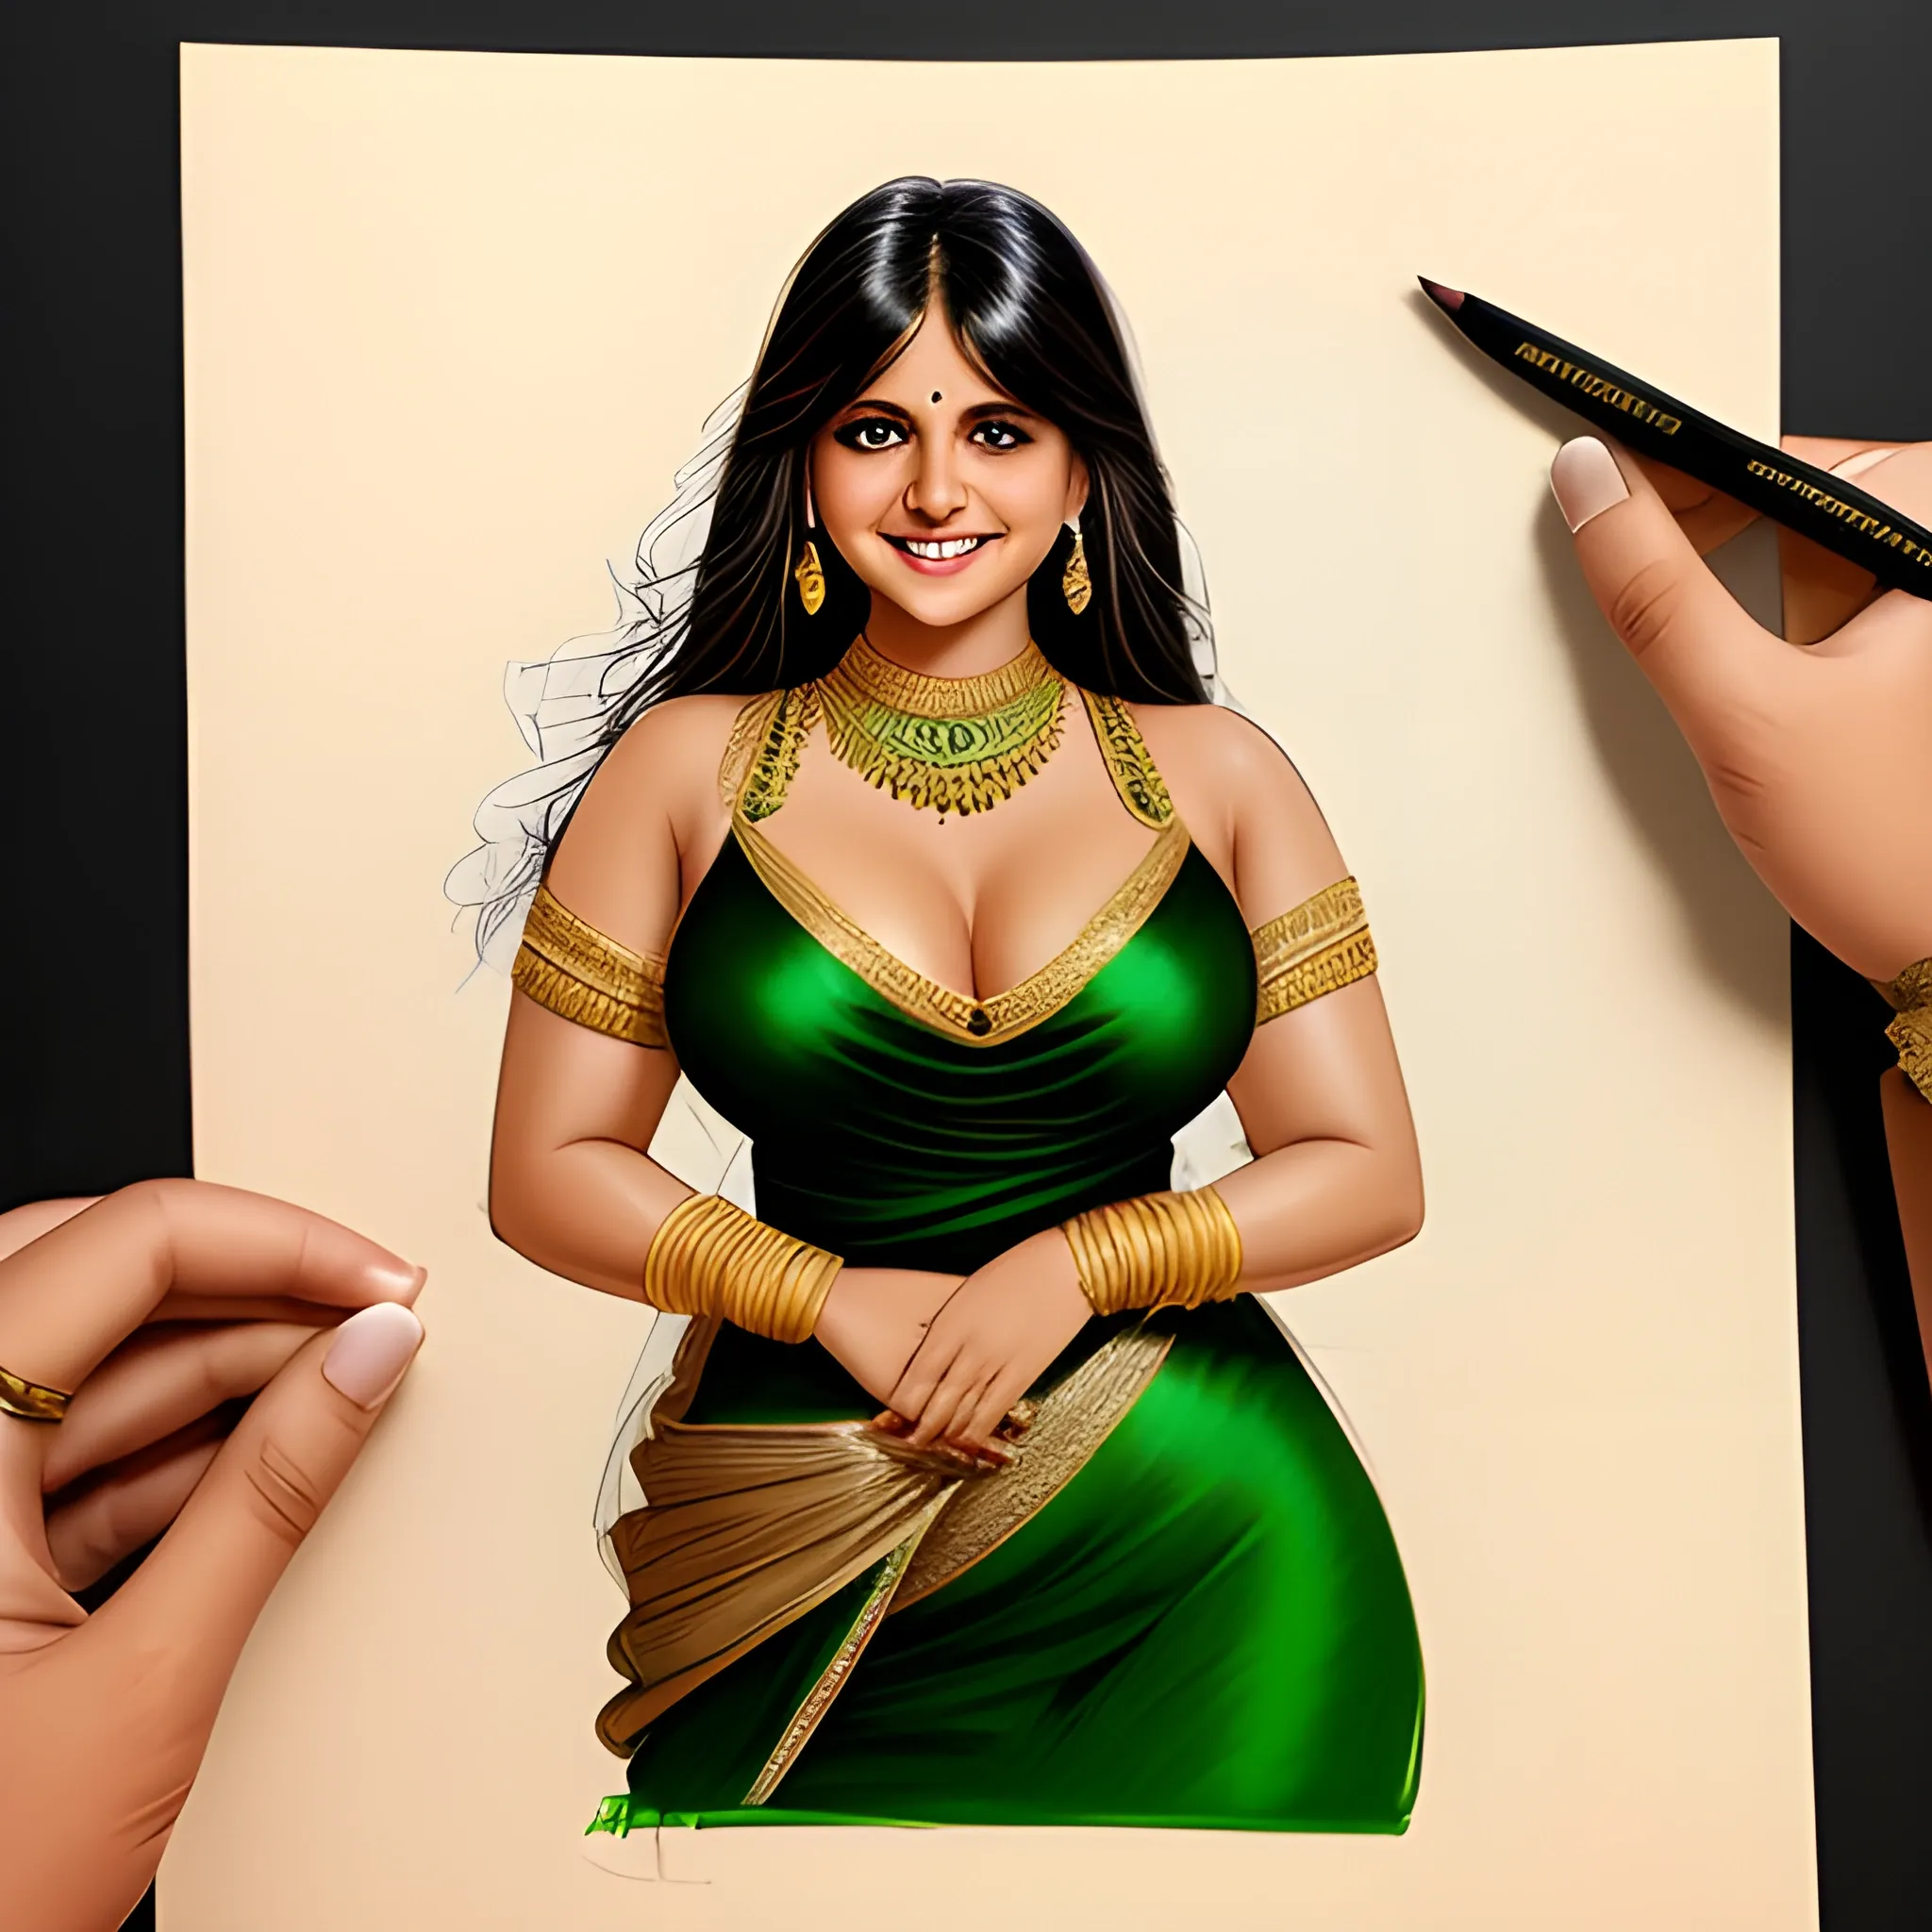 Thick Anjali Sharma
bigger thigh
 white muscular body
Enormous breasts
a stunningly beautiful princess dressed in a light black yellowish silk allur green night dress,
Wearing gold plated jewellery flirty open eyes with cutest smile 
At night 
, Pencil Sketch